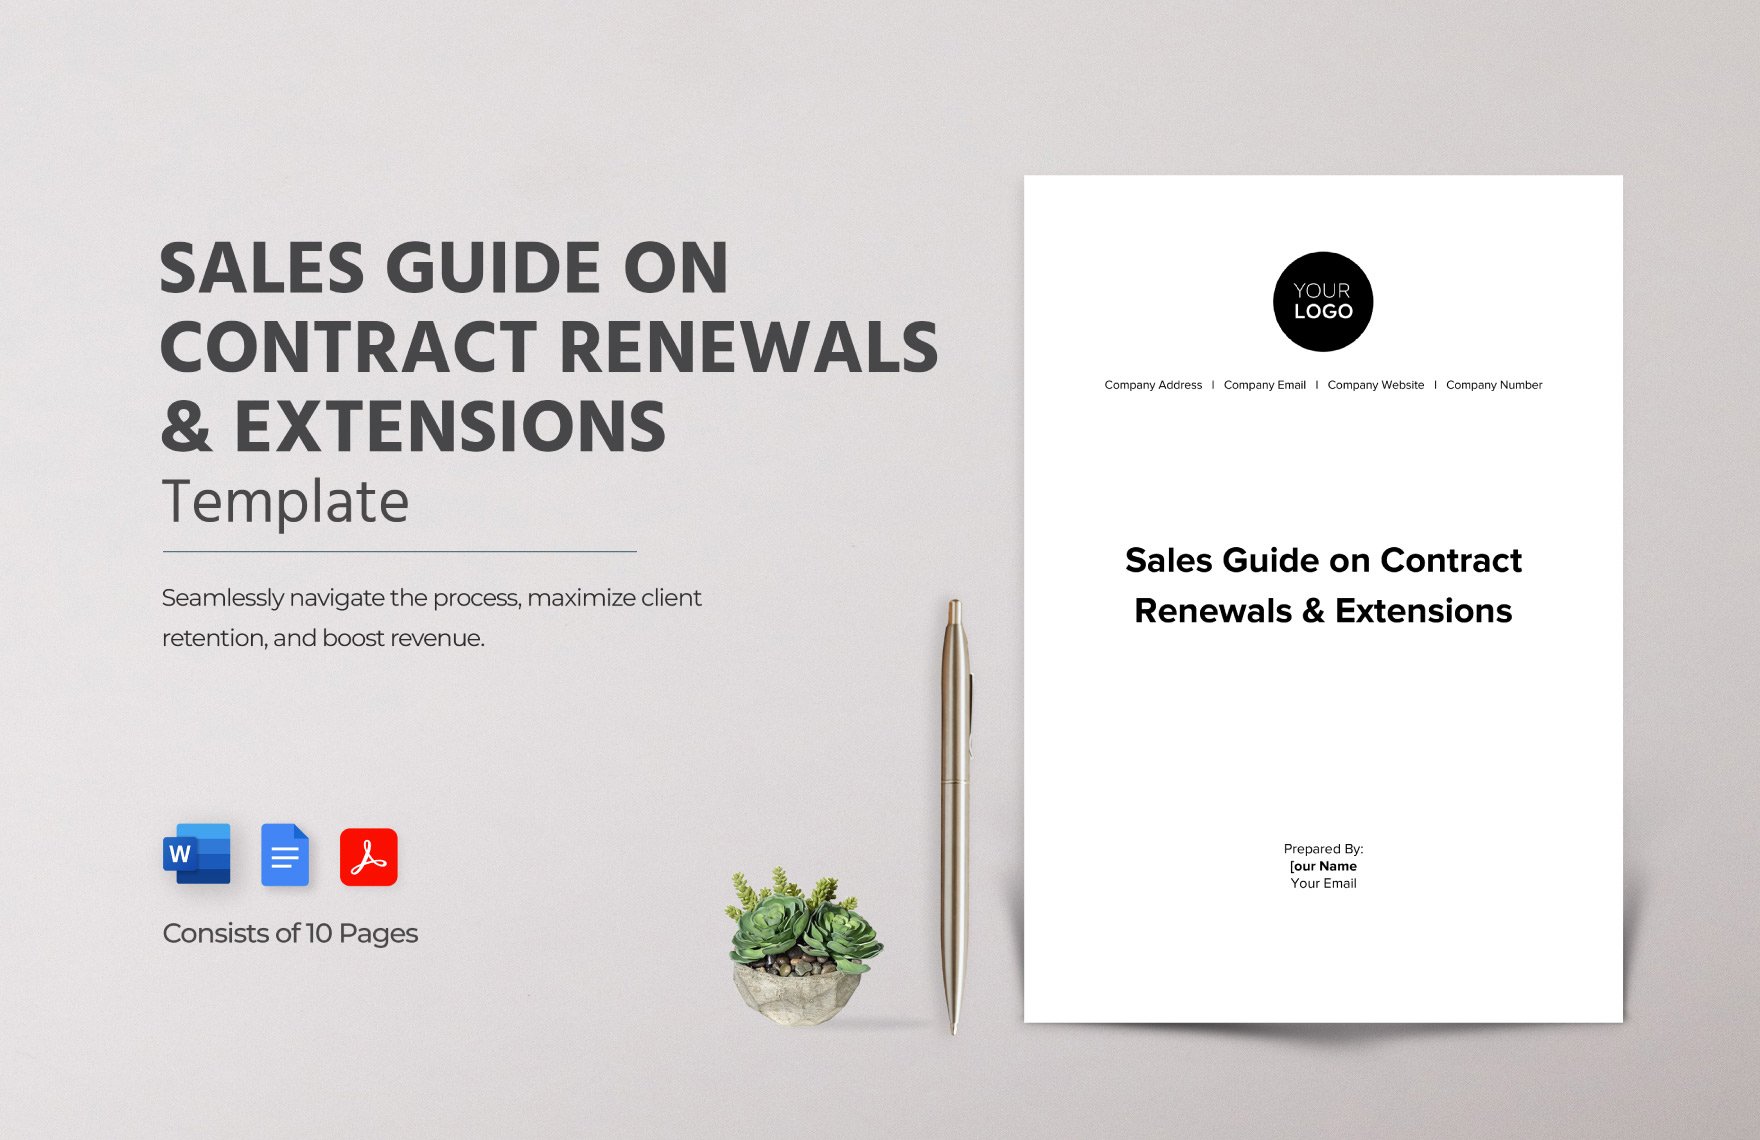 Sales Guide on Contract Renewals & Extensions Template